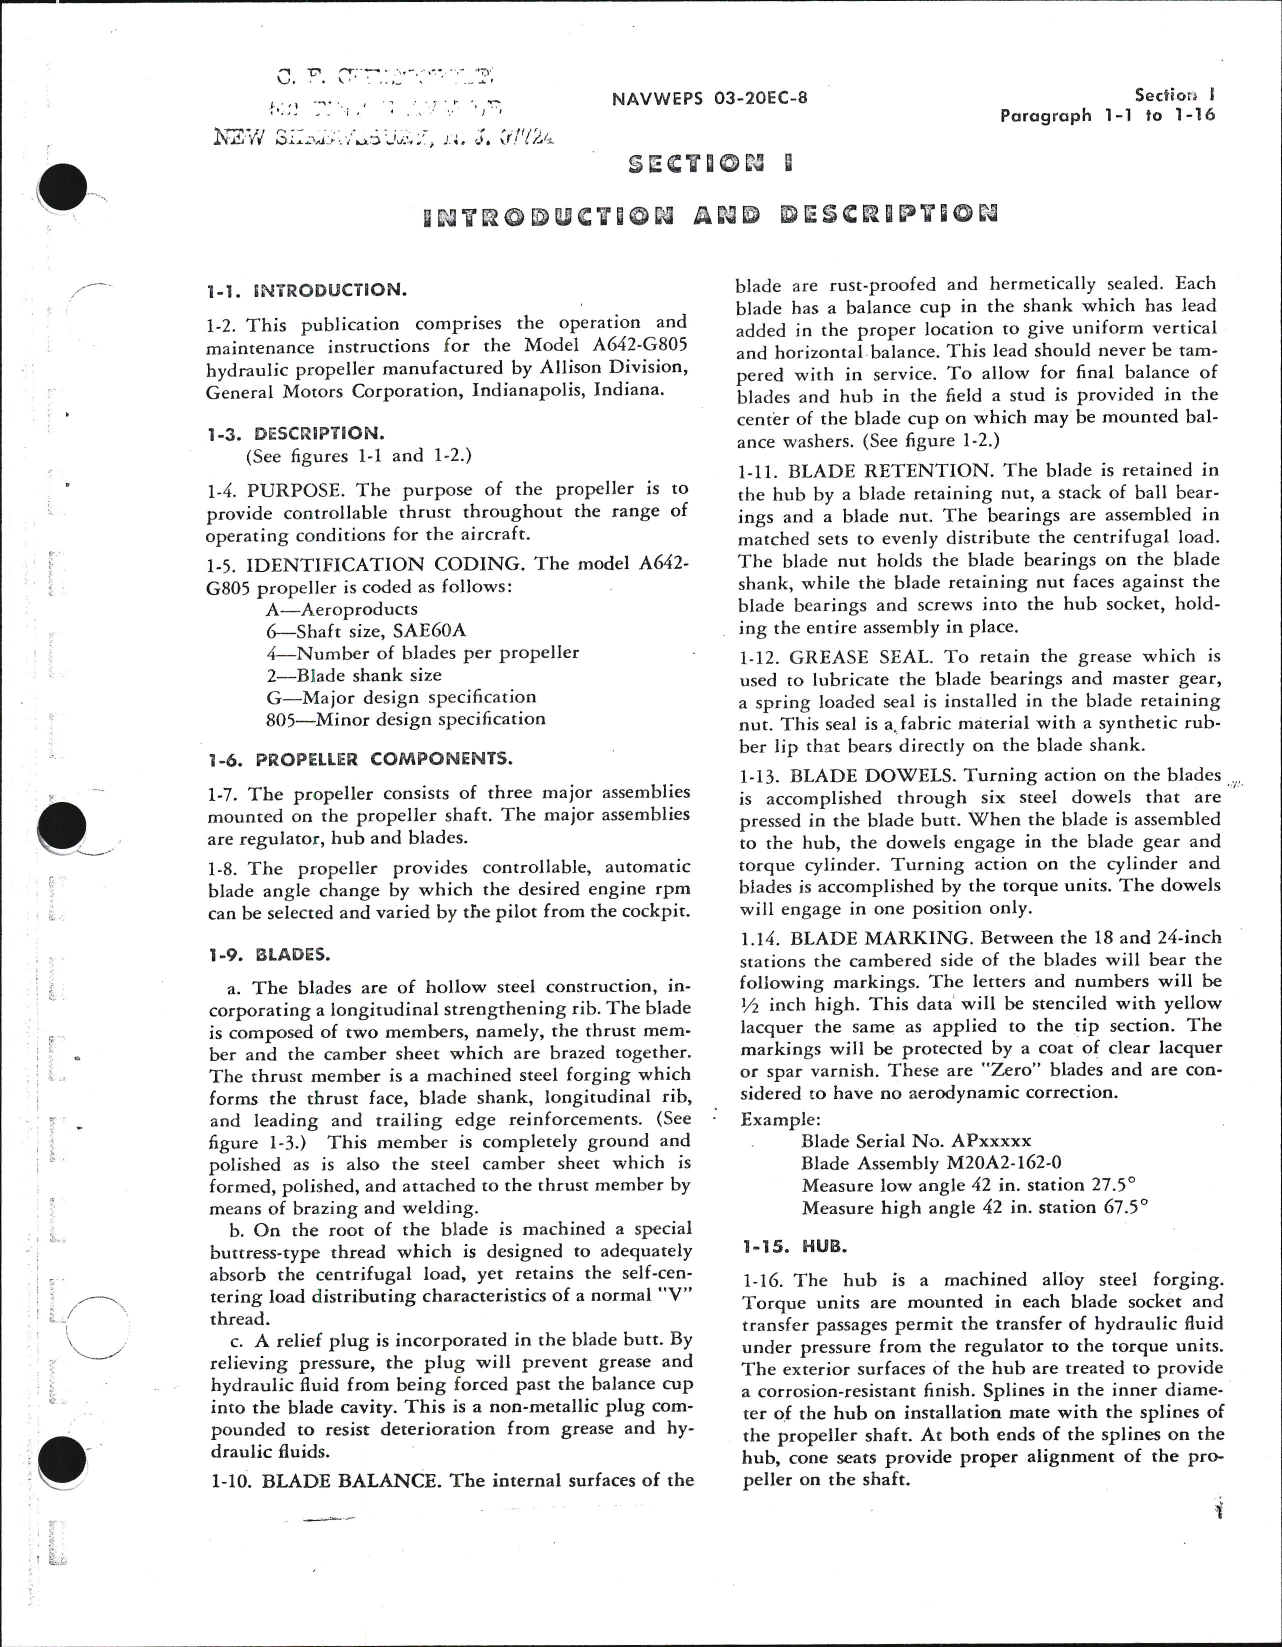 Sample page 9 from AirCorps Library document: Operation and Maintenance Instructions for Allison Hydraulic Propeller Model A642-G805